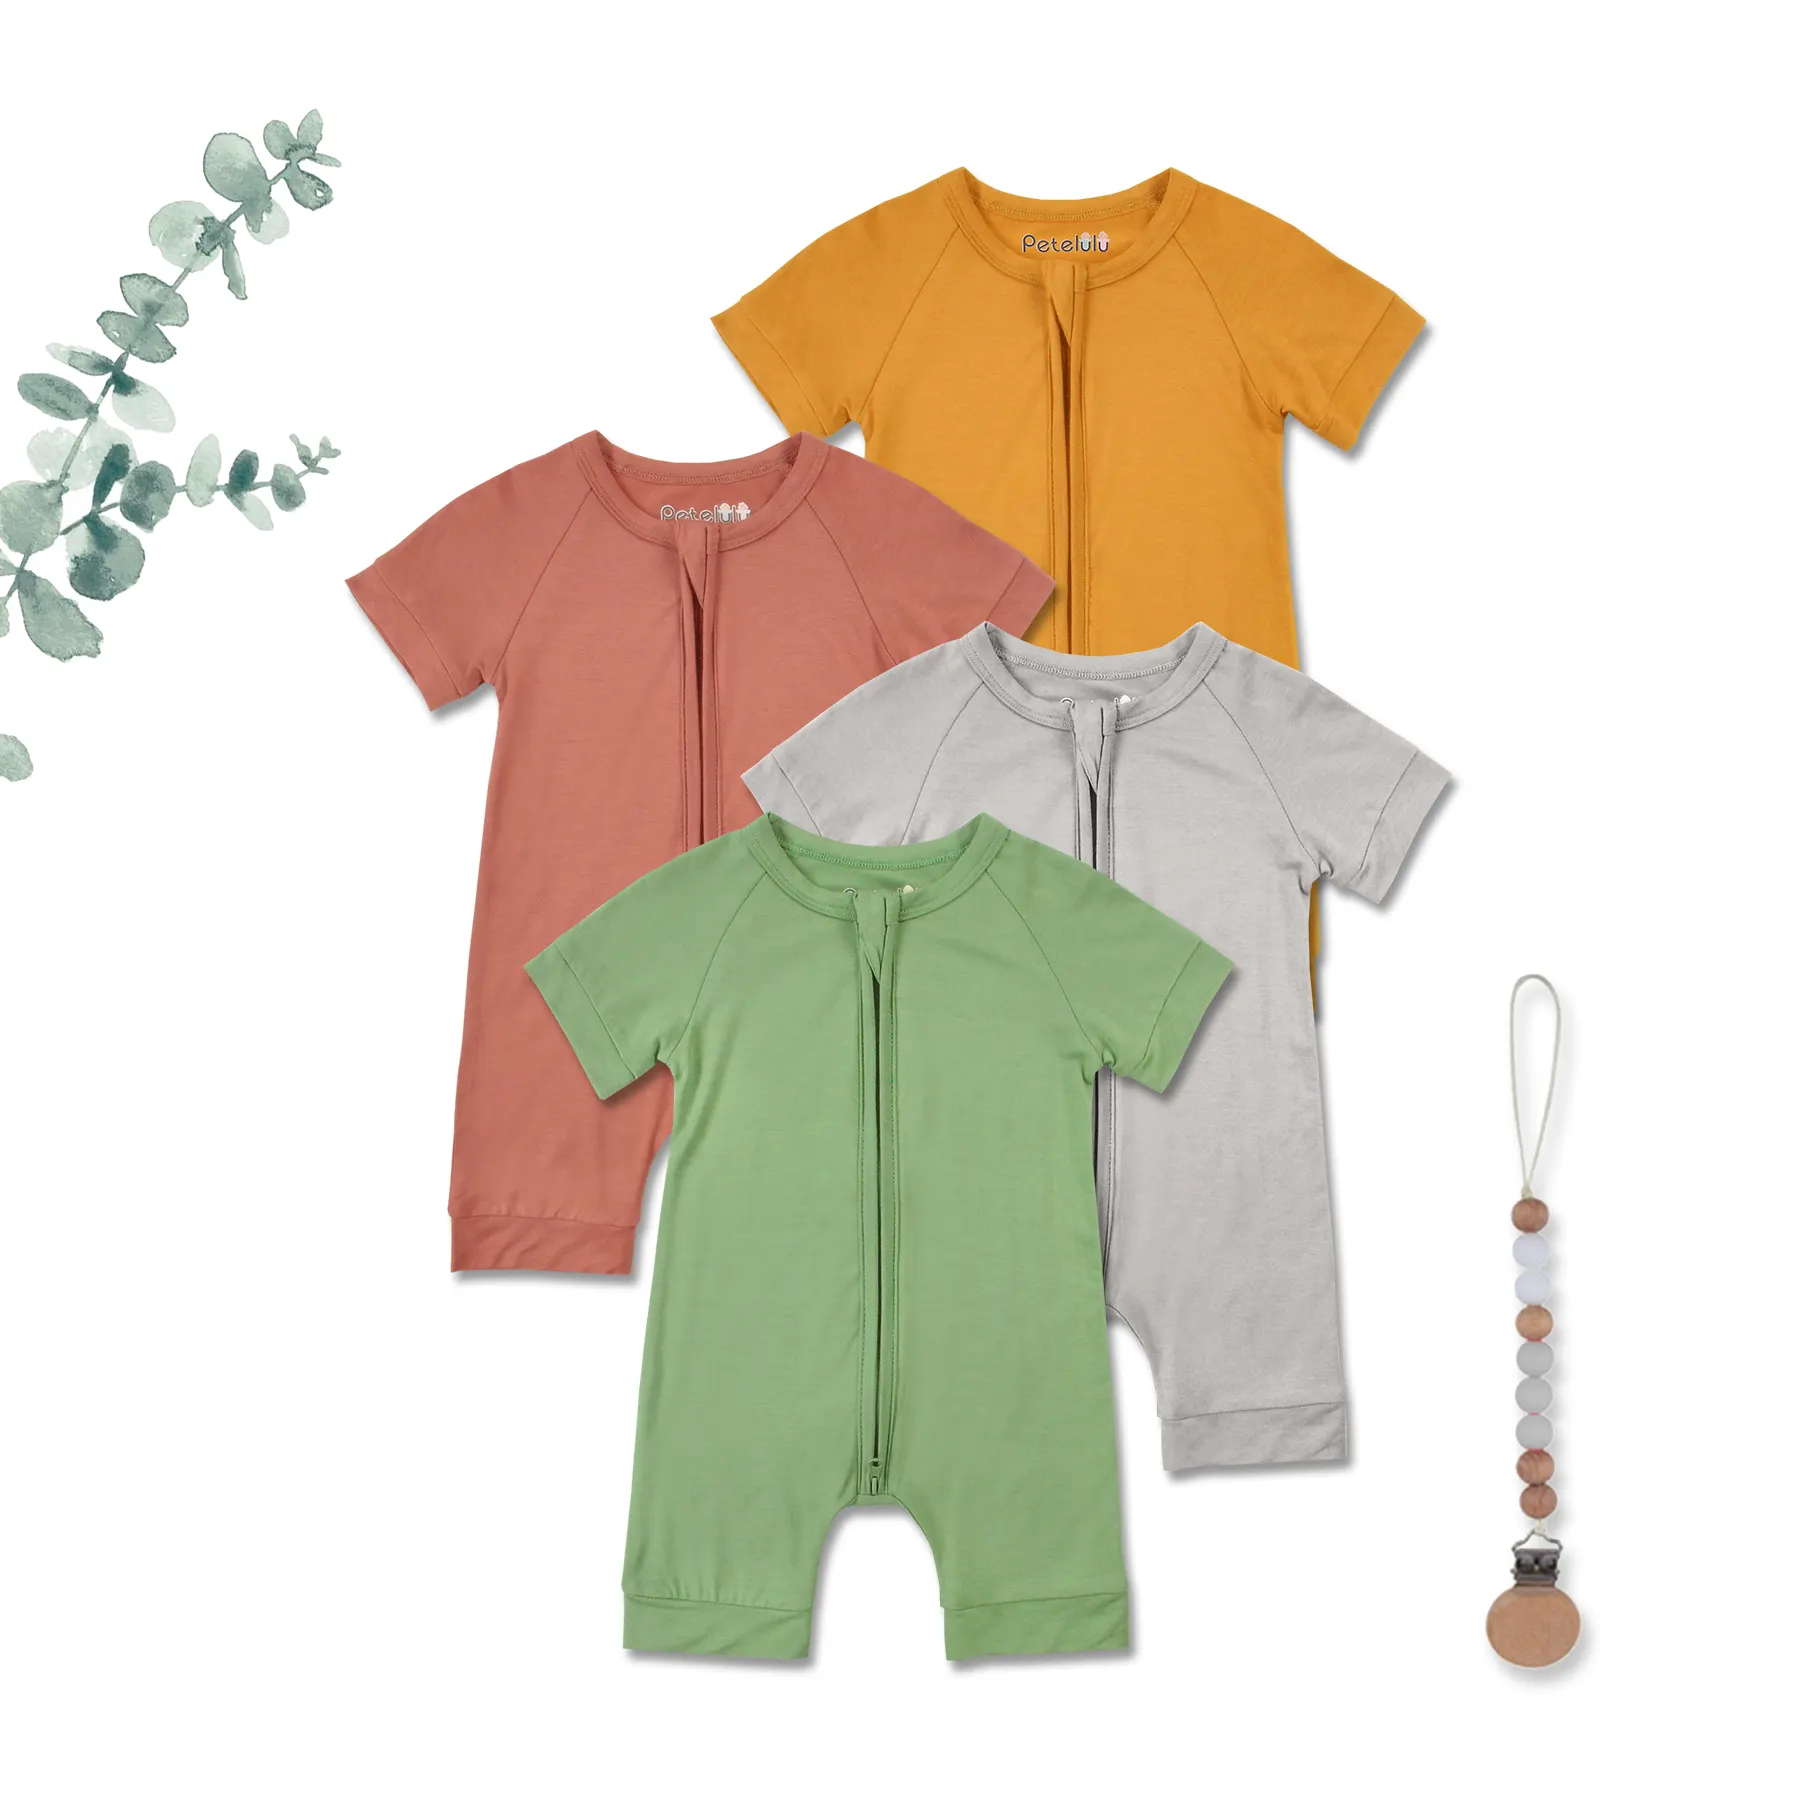 In Stock Bamboo Viscose Baby Short Sleeve Romper Wholesale Zipper Newborn Baby Clothes Infant Bodysuit